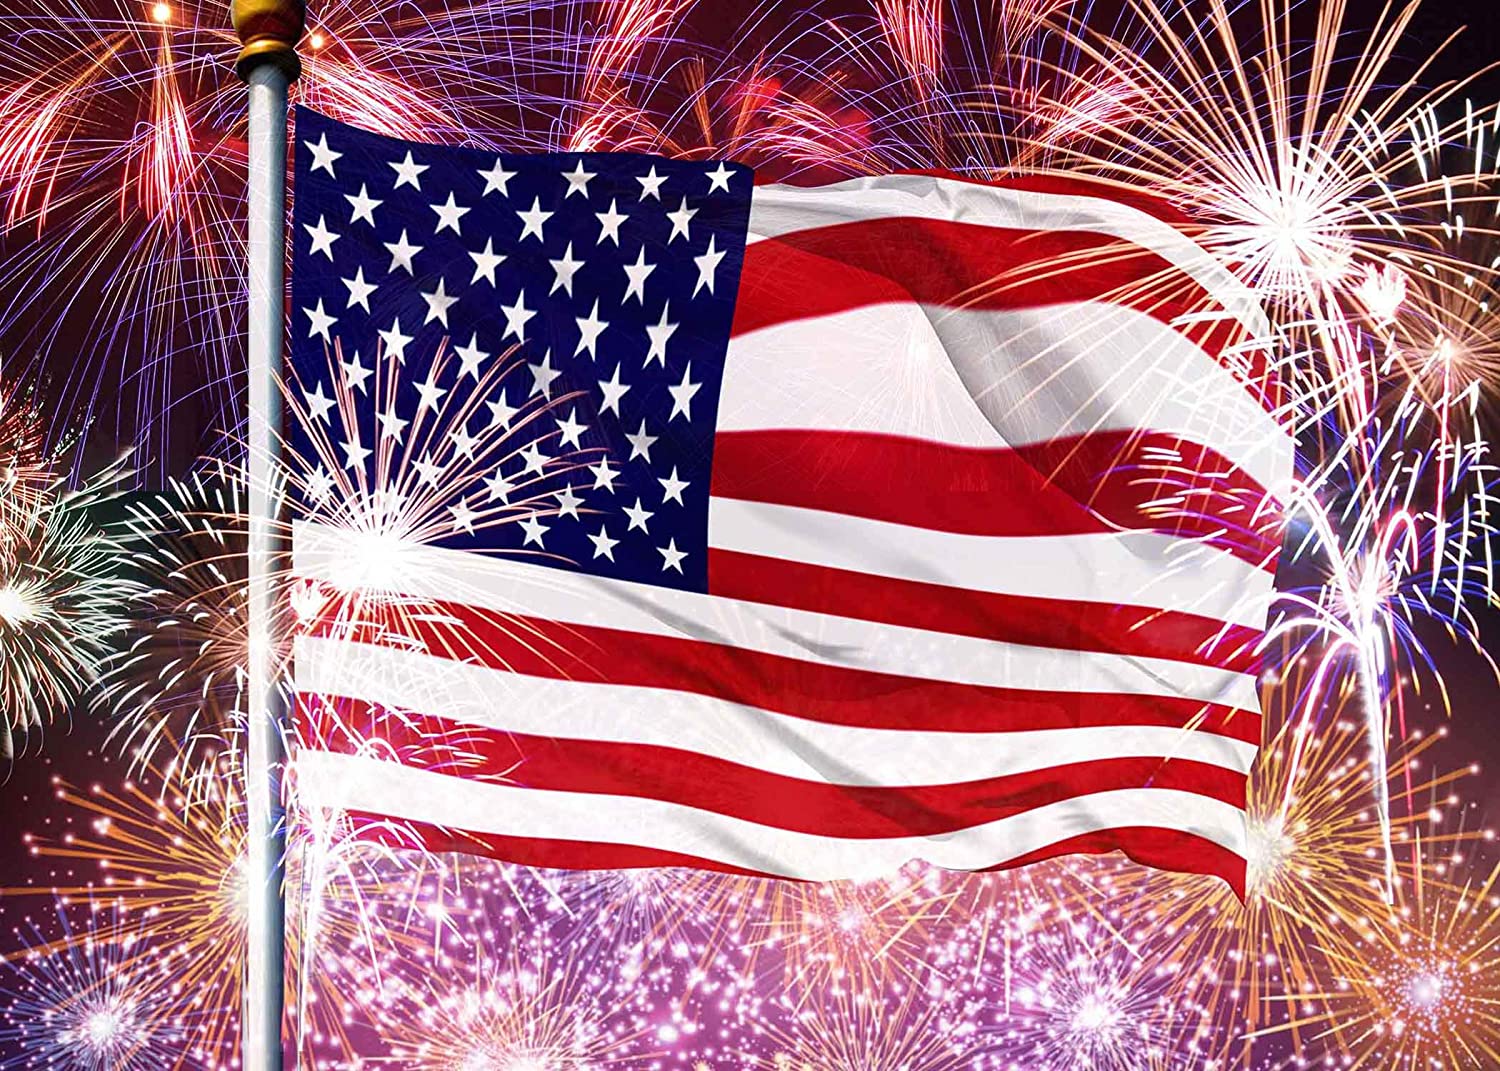 American Flag With Fireworks Background